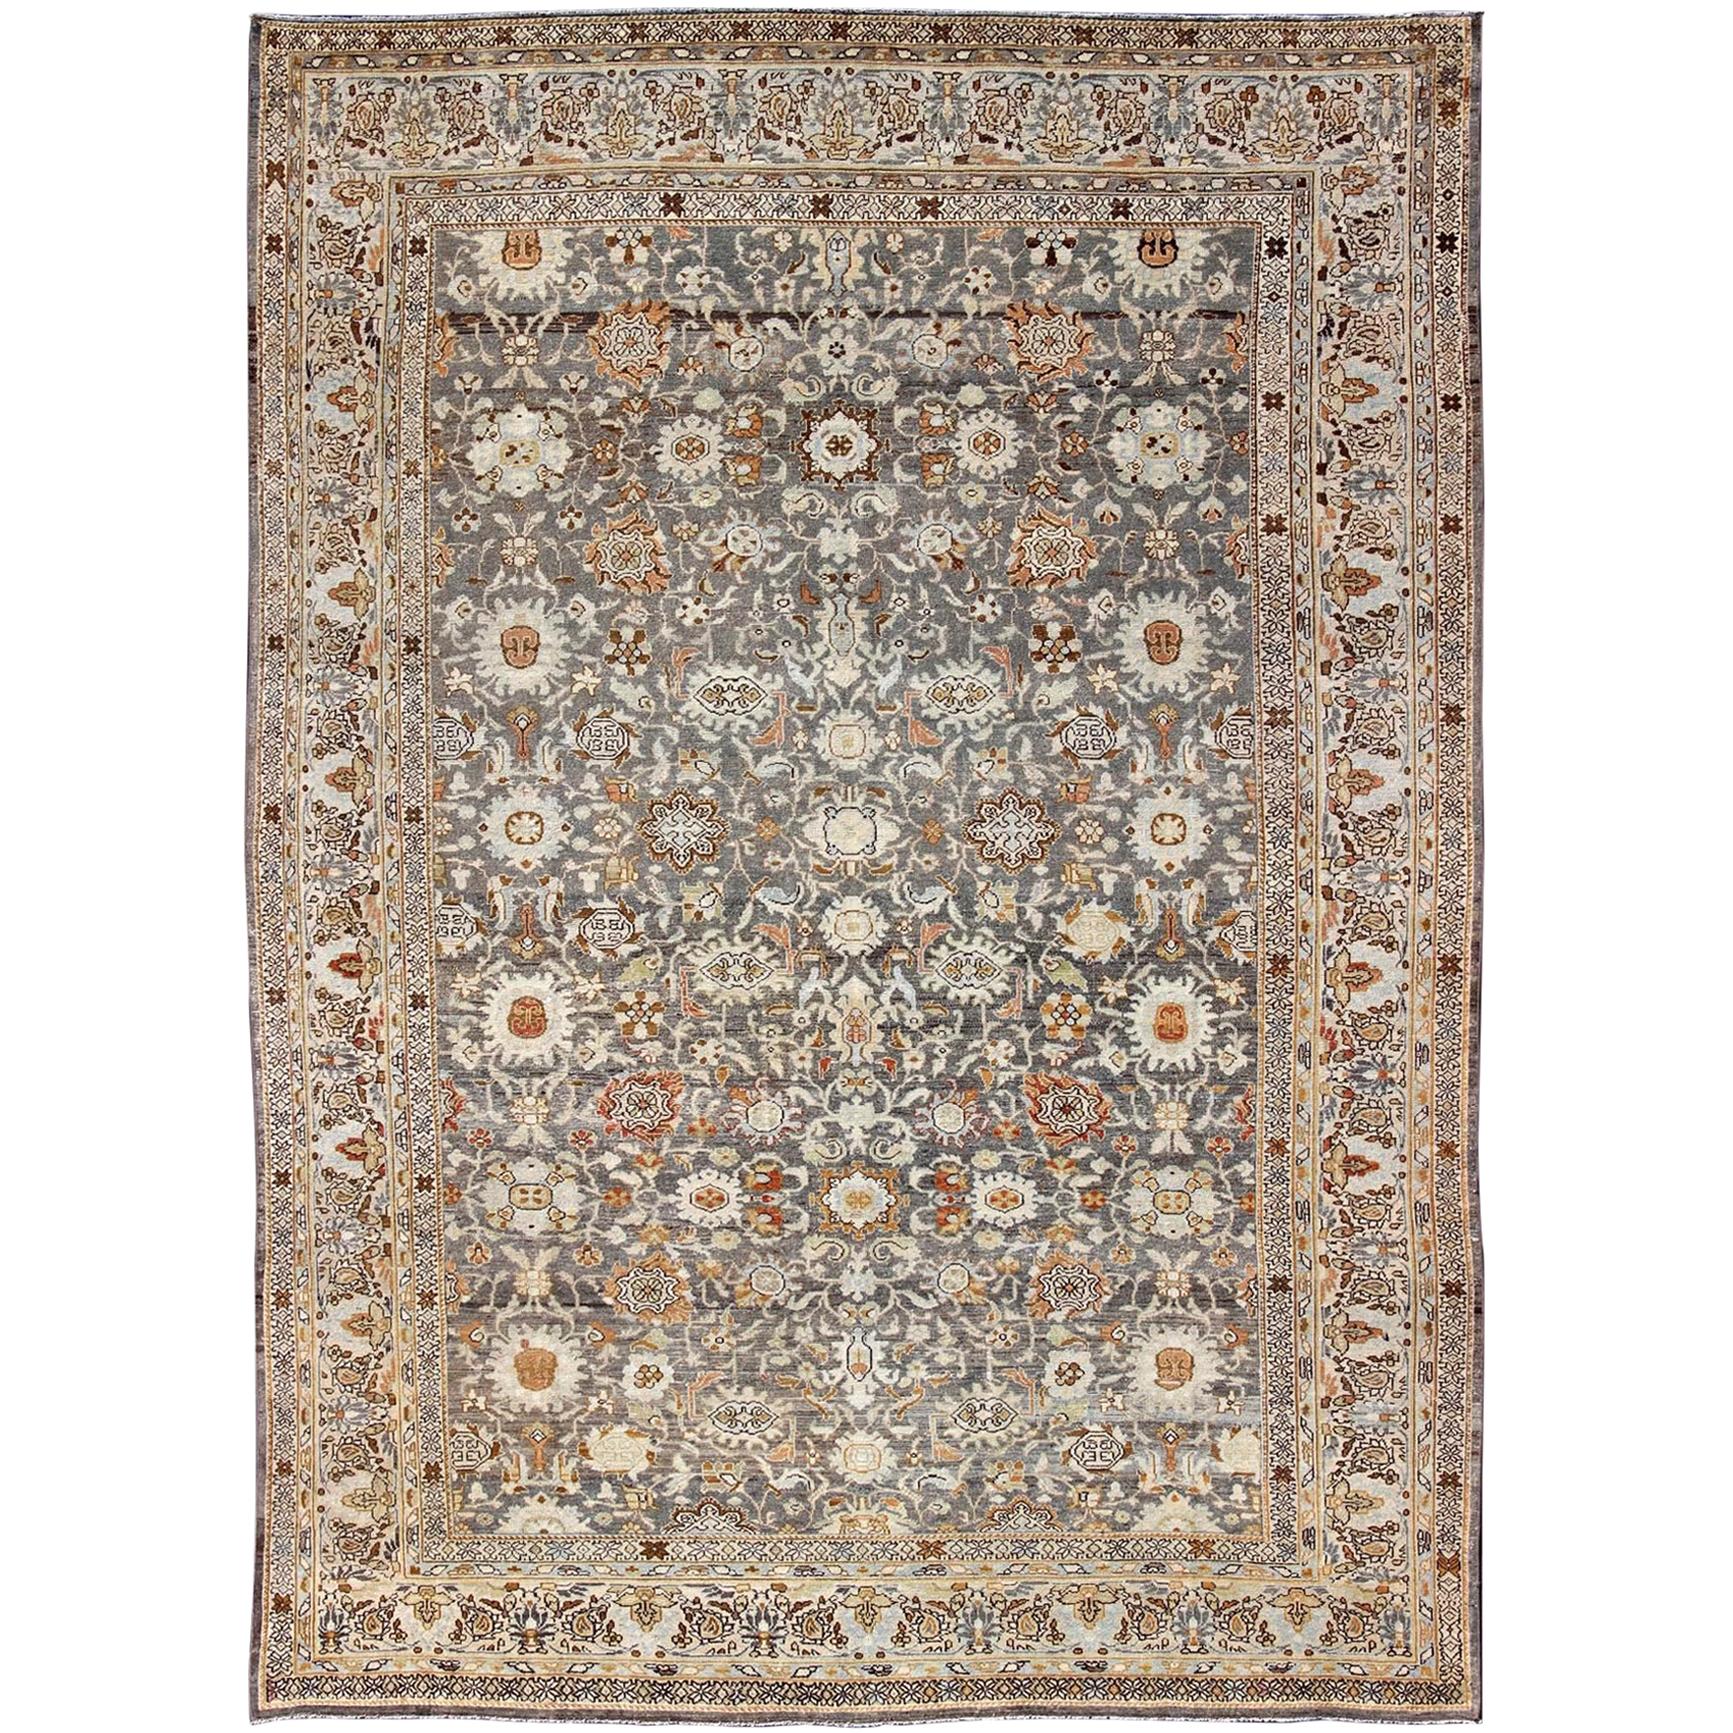 Large All-Over Gray and Orange Persian Malayer Rug with All-Over Floral Design